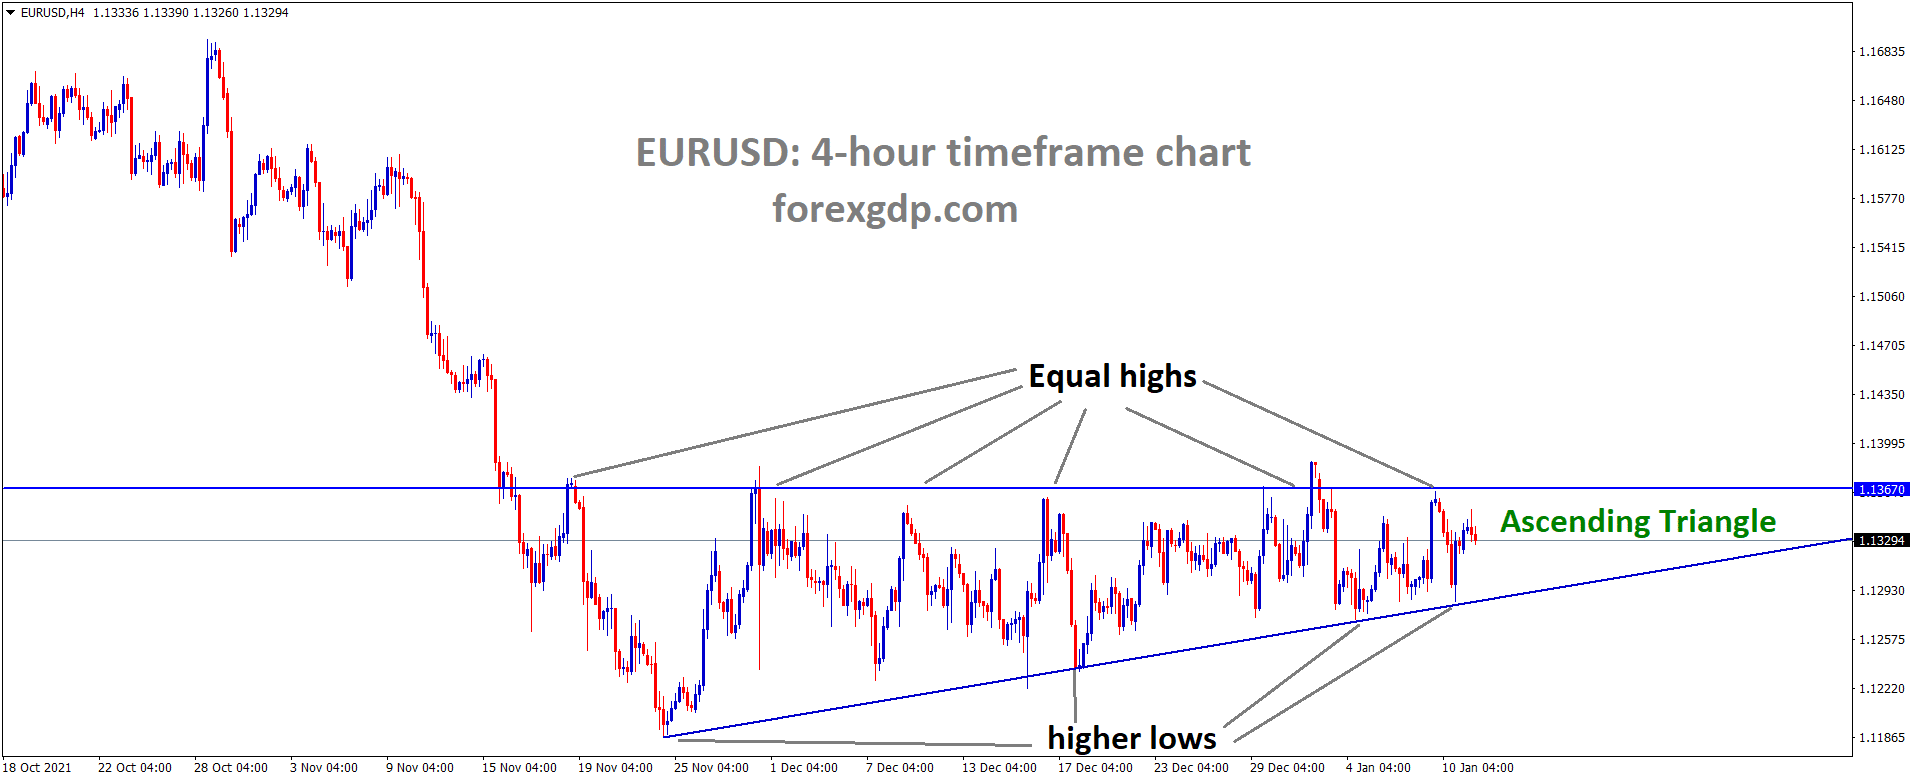 EURUSD is moving in an ascending triangle pattern and the market has rebounded from the higher low area of the triangle pattern.